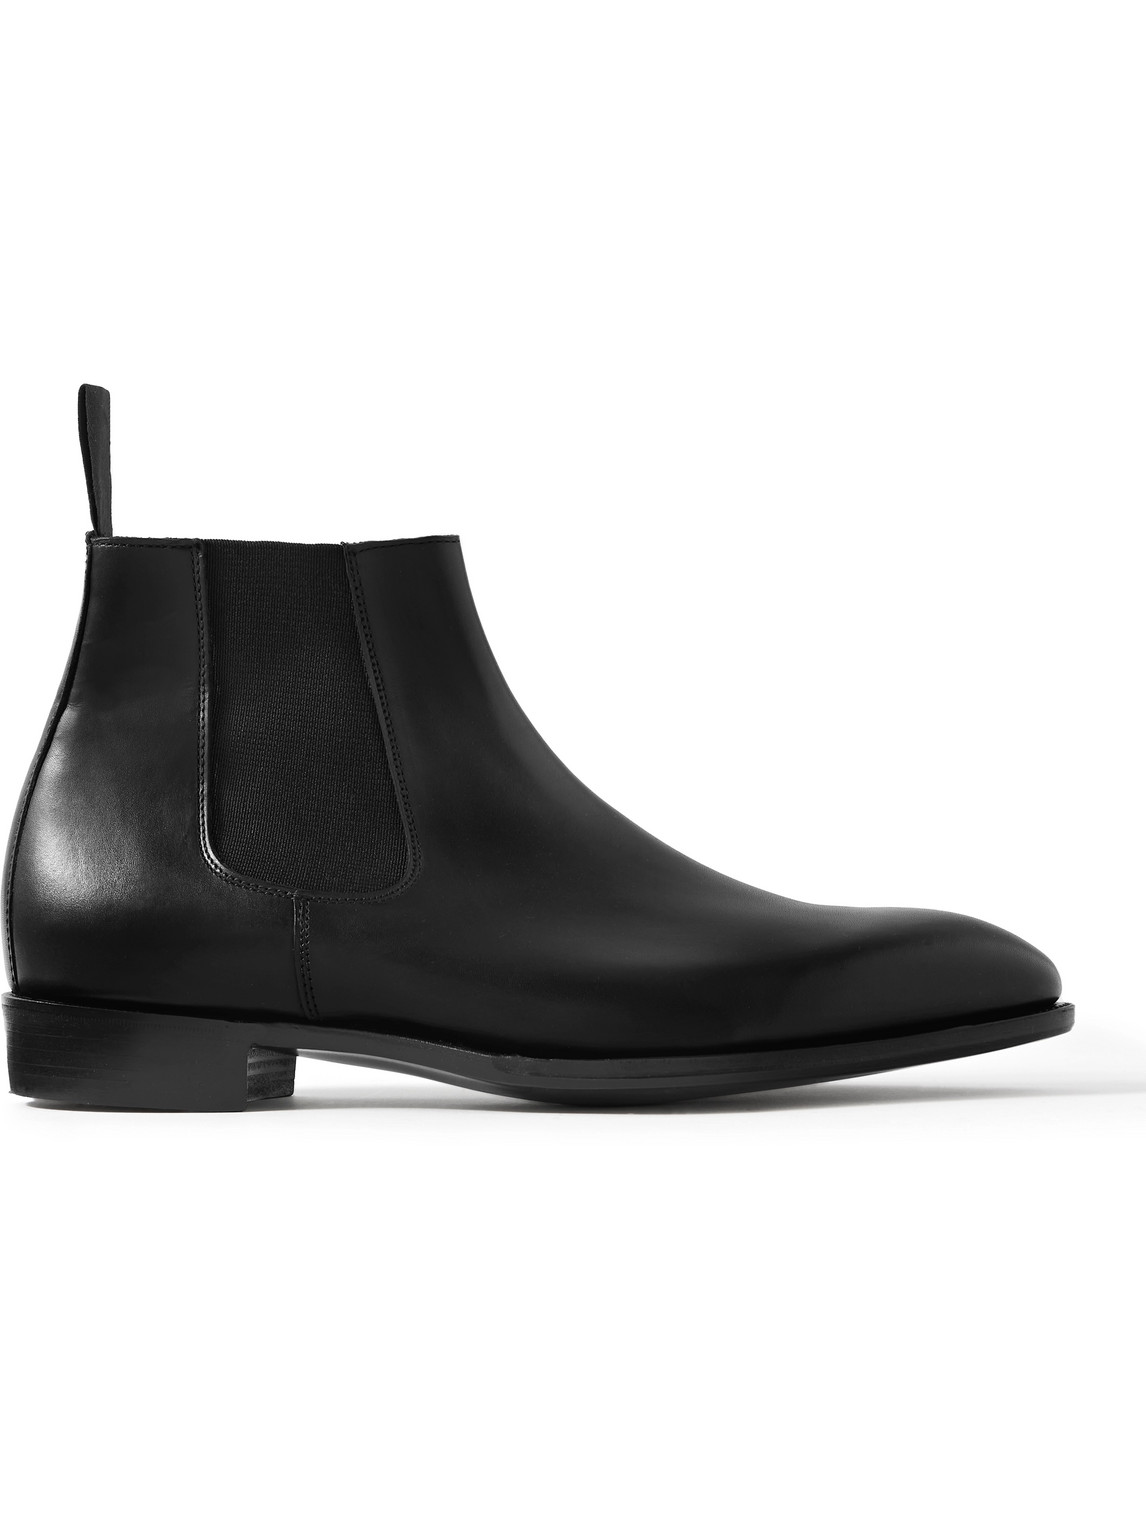 George Cleverley - Jason Leather Chelsea Boots - Men - Black - UK 11 von George Cleverley